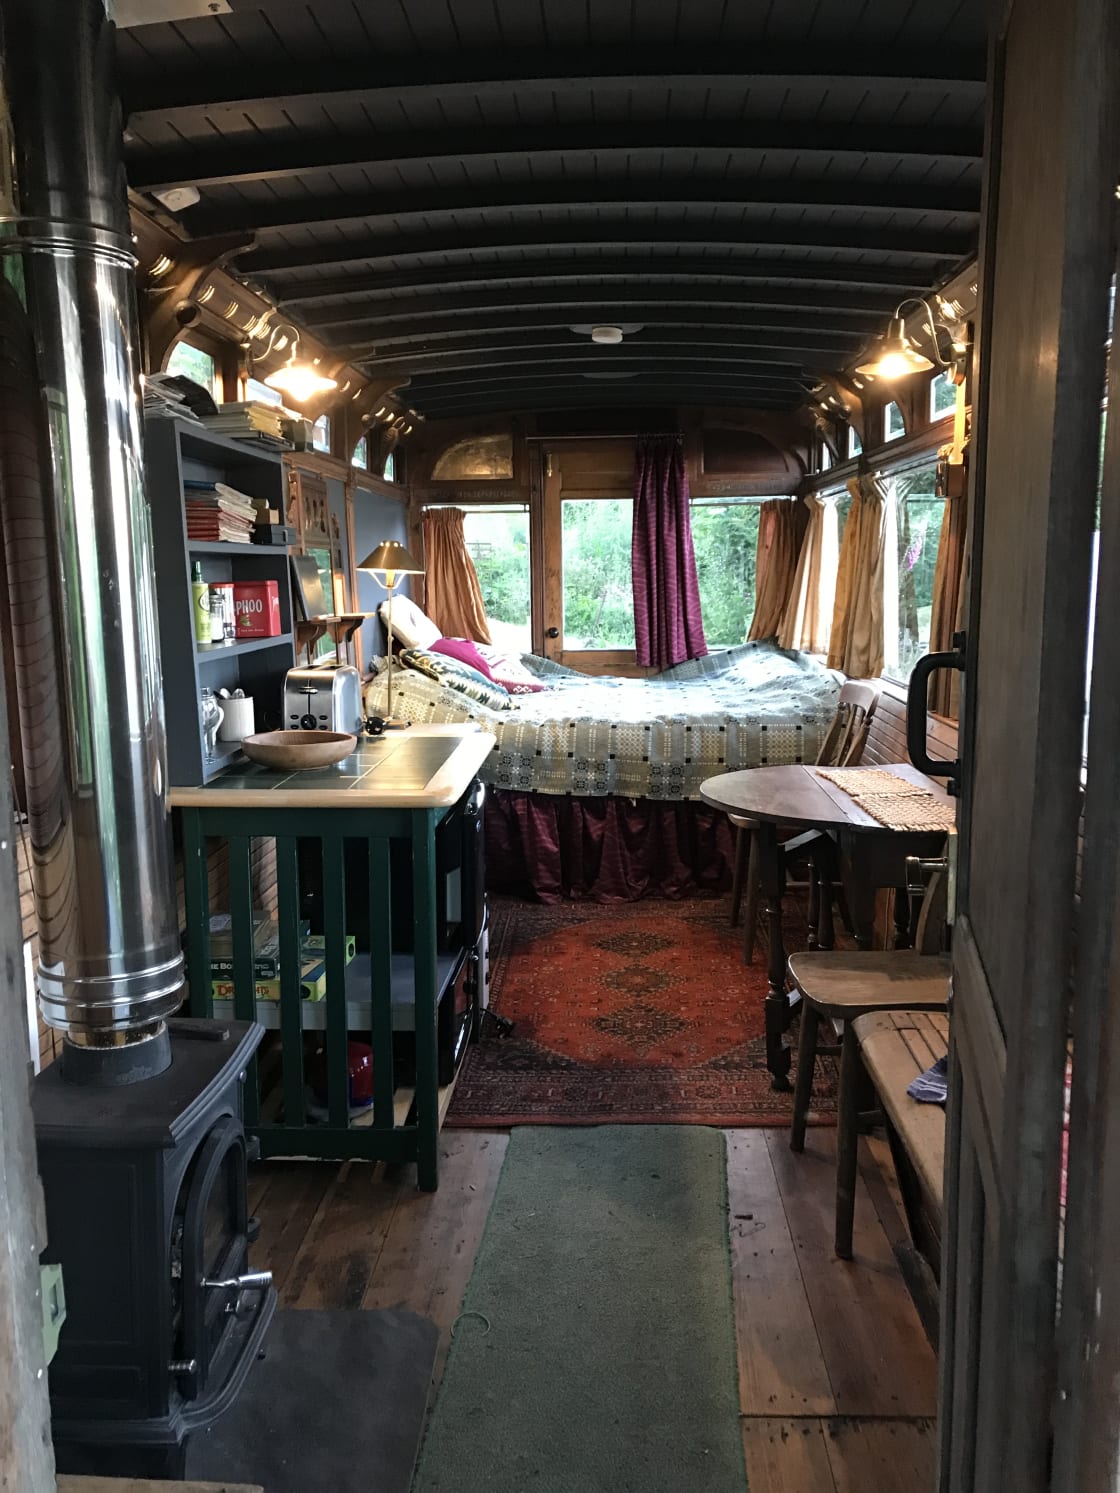 Inside Tram, comfy Bed, indoor seating/kitchen area, Silk Curtains, Historic  interior with opening quarter lights, LED lights behind Air Vents.